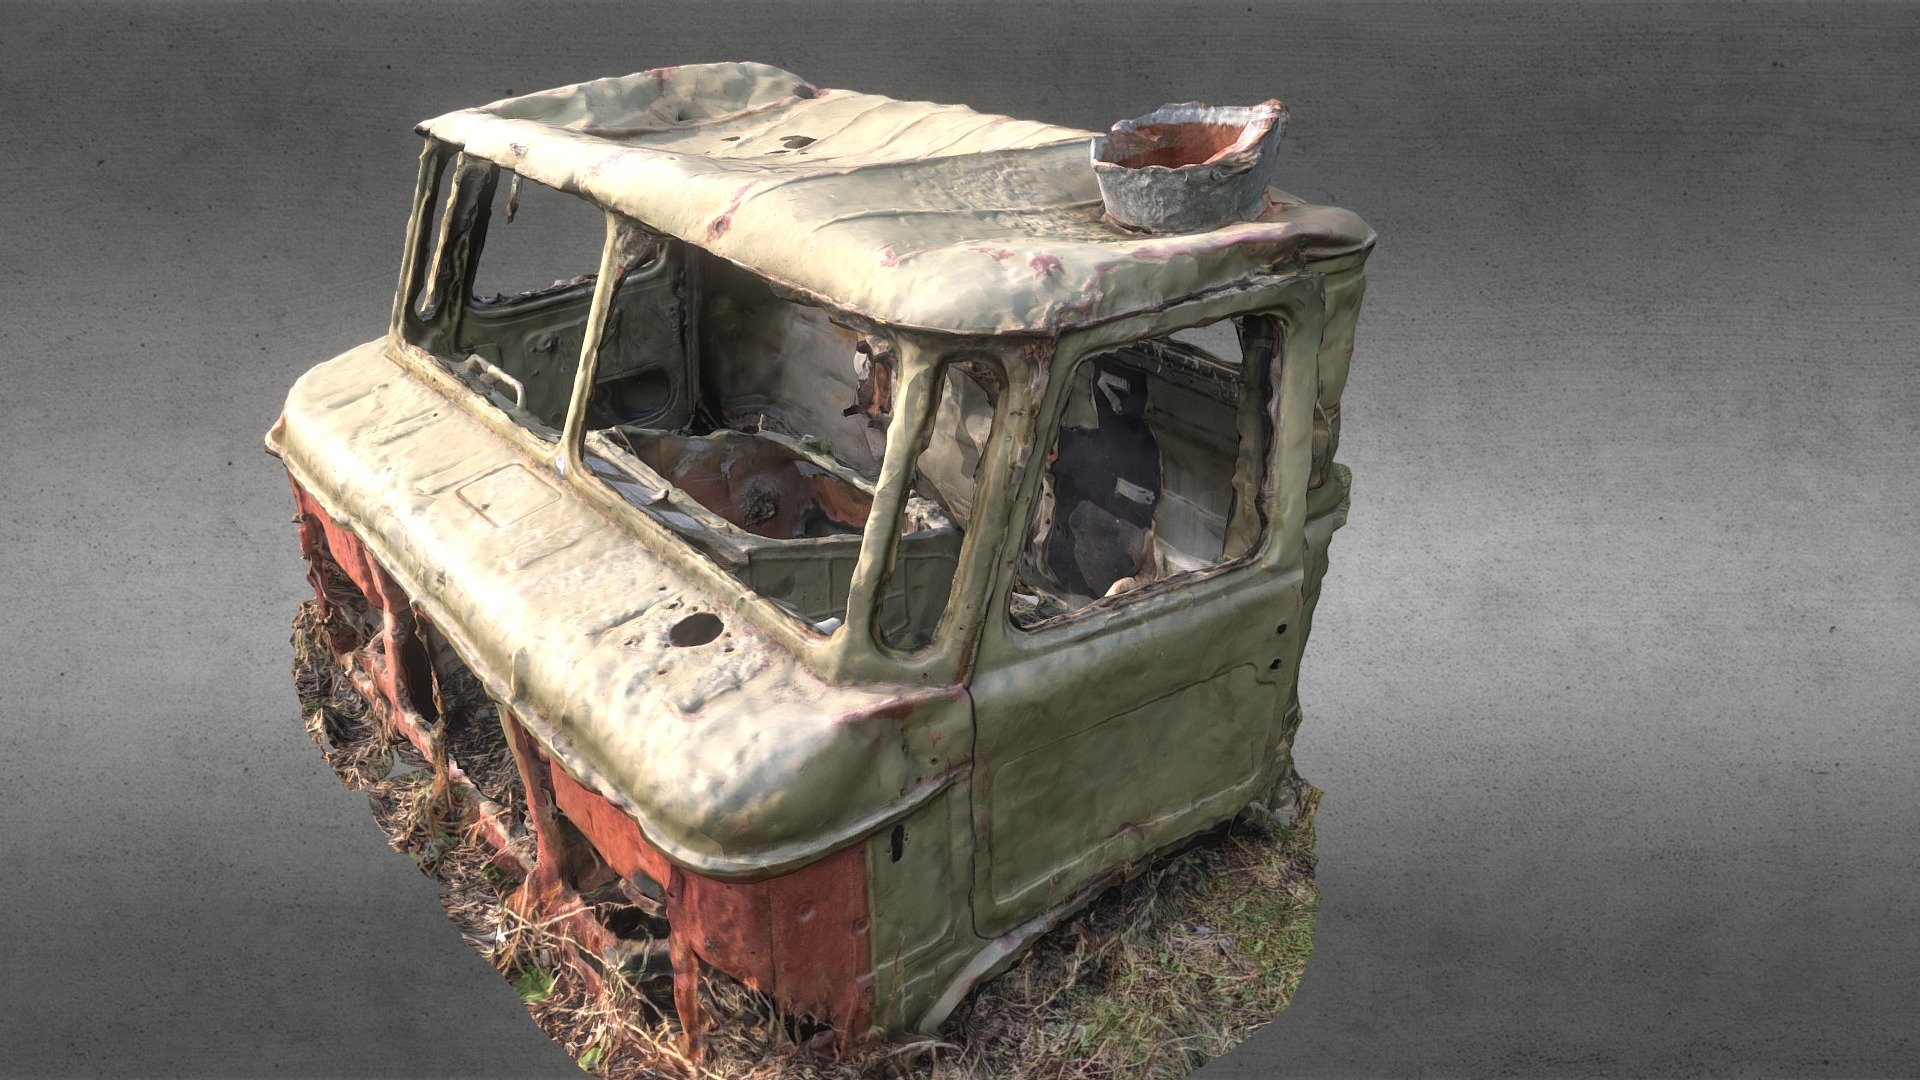 A destroyed driver's cab from an old truck. Found in a small mountain village in Georgia.

The models comes with diffuse, normal, ao and roughness maps.

Goes well together with the old soviet truck pack 3d model